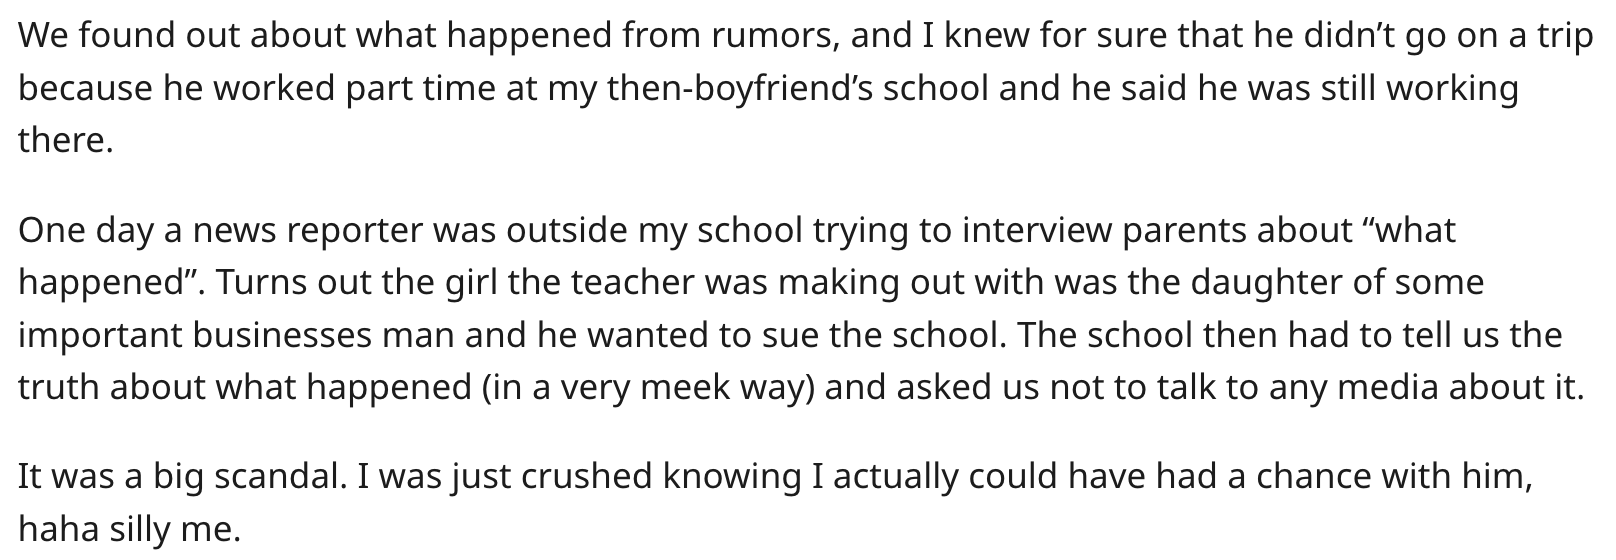 document - We found out about what happened from rumors, and I knew for sure that he didn't go on a trip because he worked part time at my thenboyfriend's school and he said he was still working there. One day a news reporter was outside my school trying 